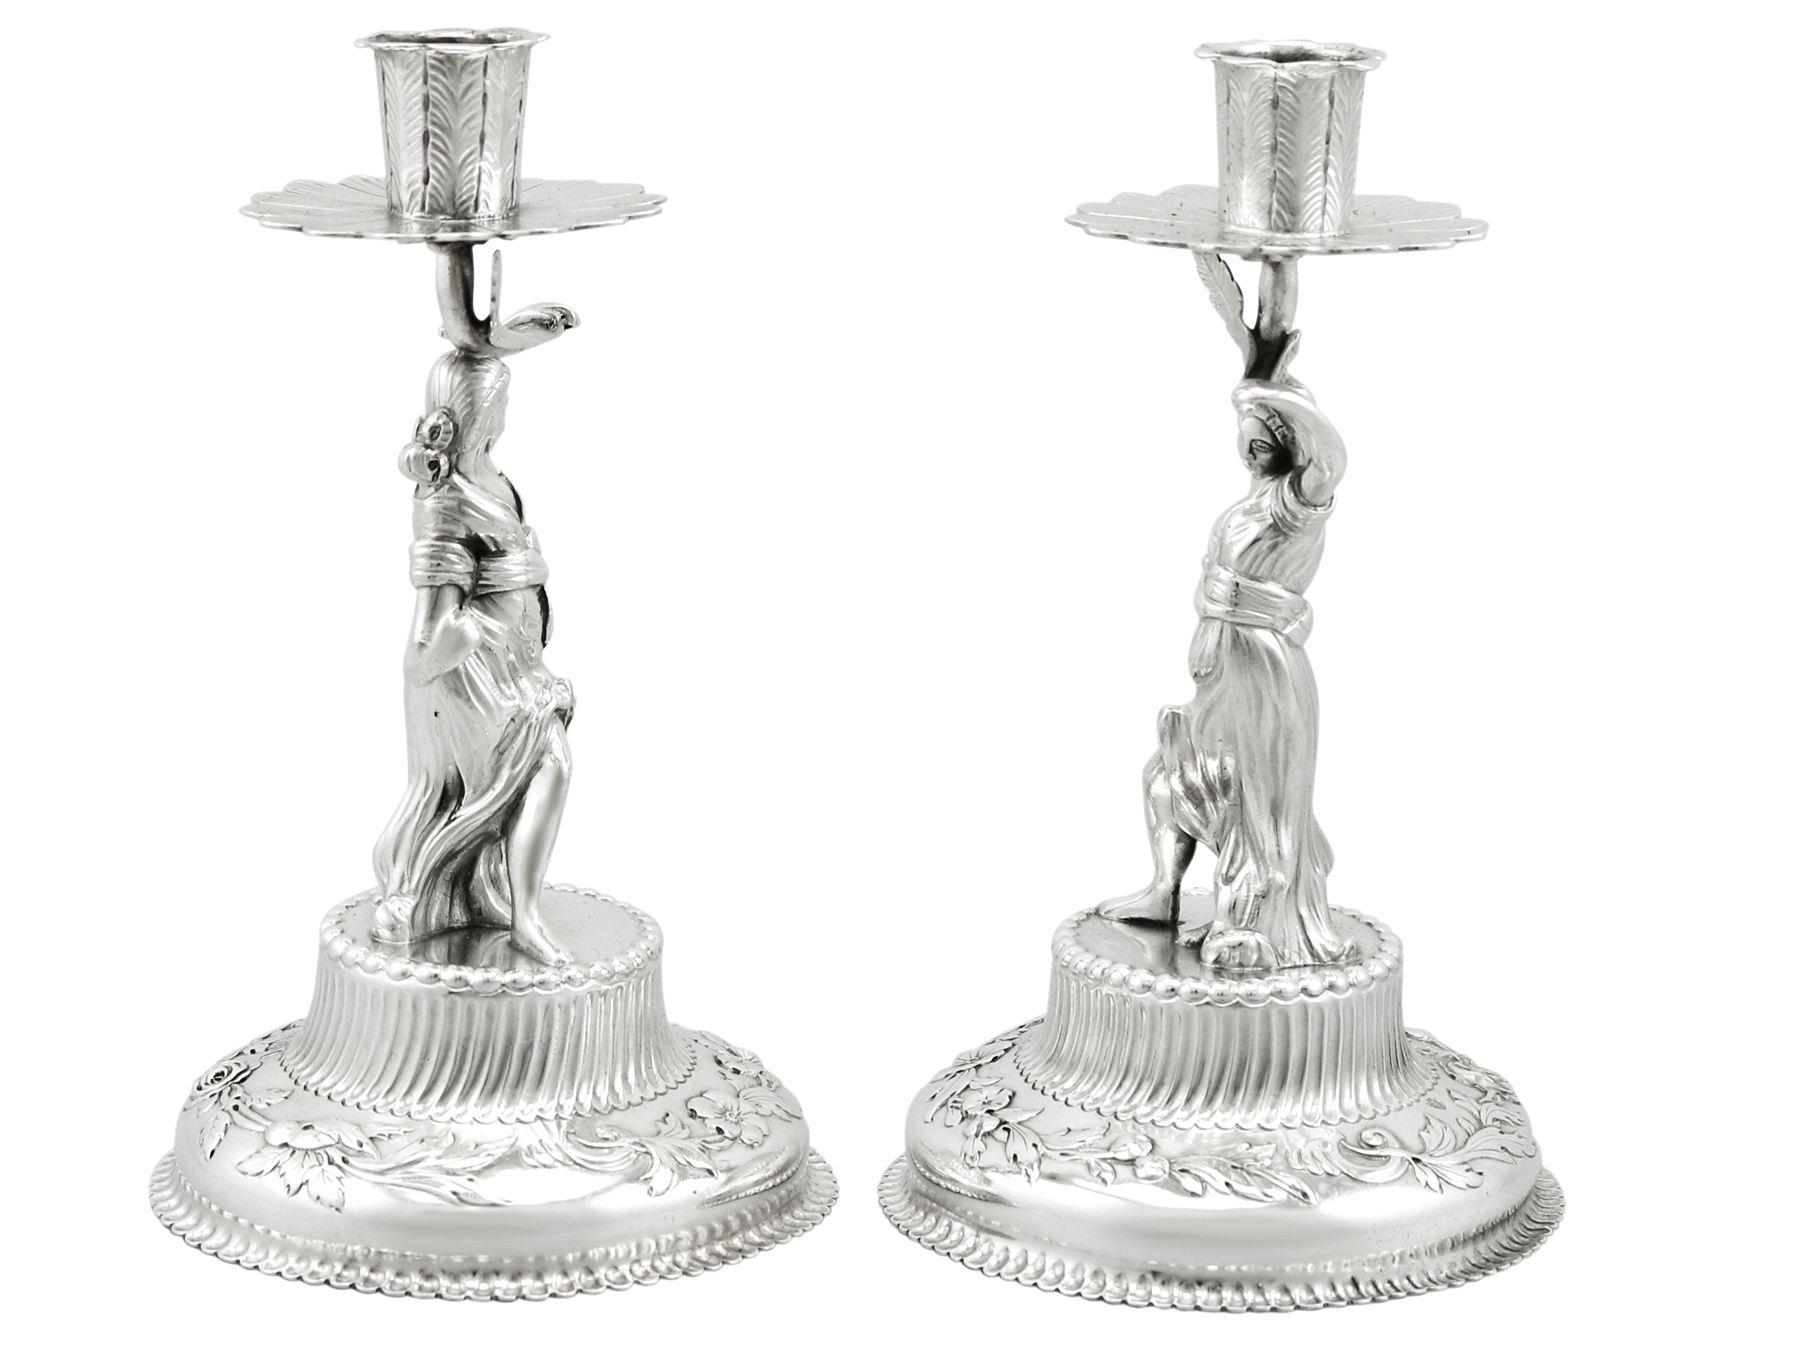 An exceptional, fine and impressive pair of antique Victorian English sterling silver tapersticks made by Walter & John Barnard; an addition of our ornamental silverware collection.

These exceptional antique Victorian Walter & John Barnard